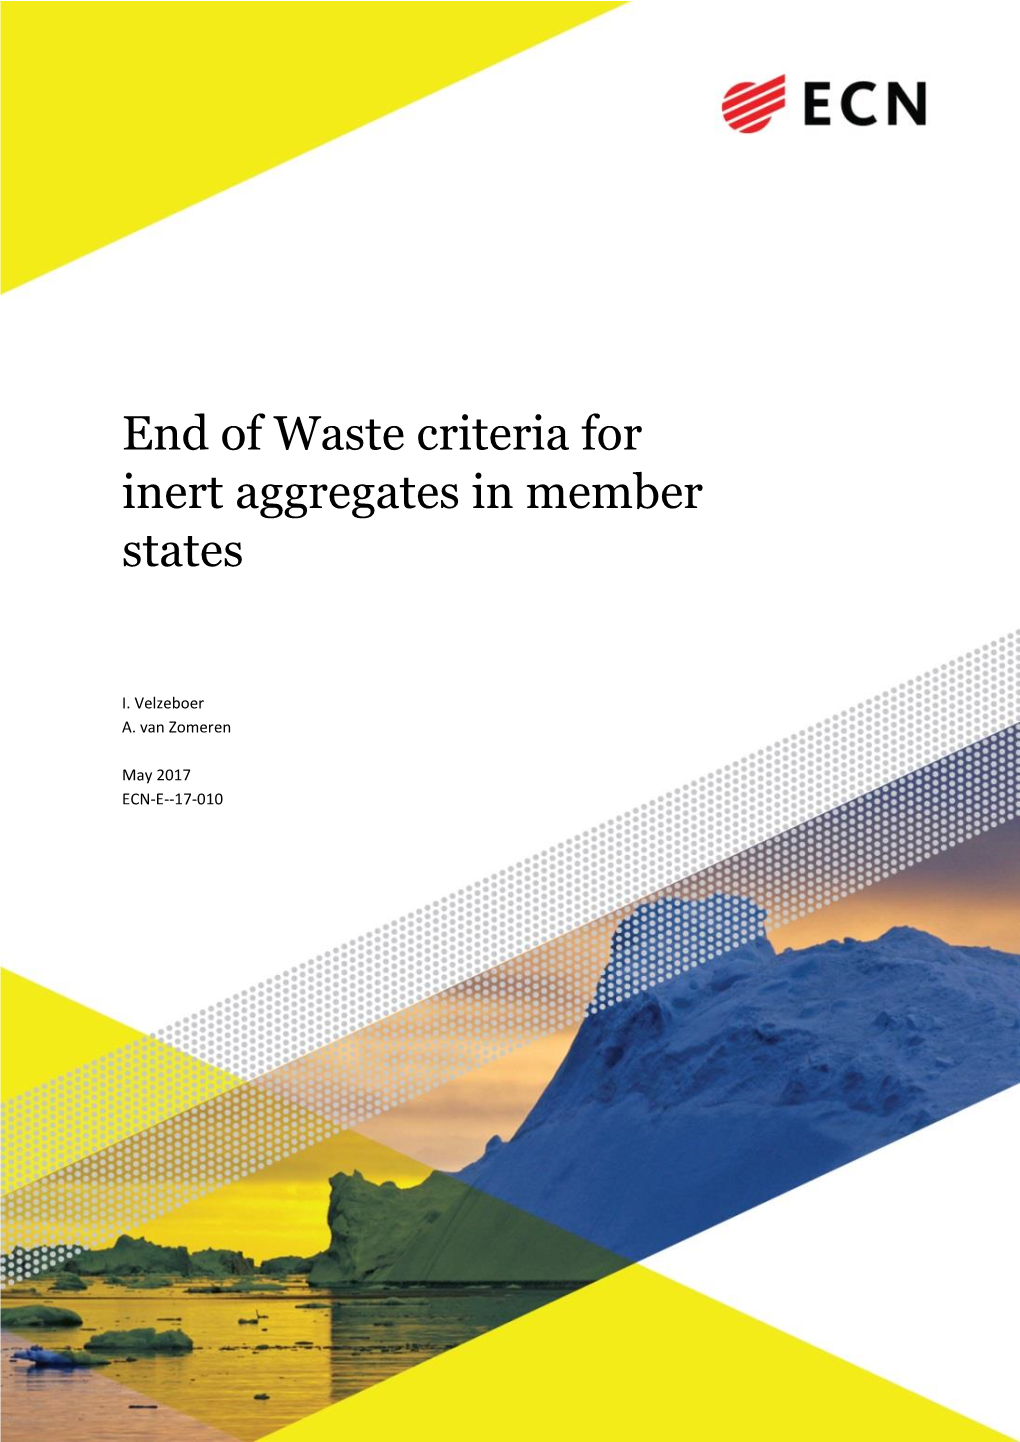 End of Waste Criteria for Inert Aggregates in Member States